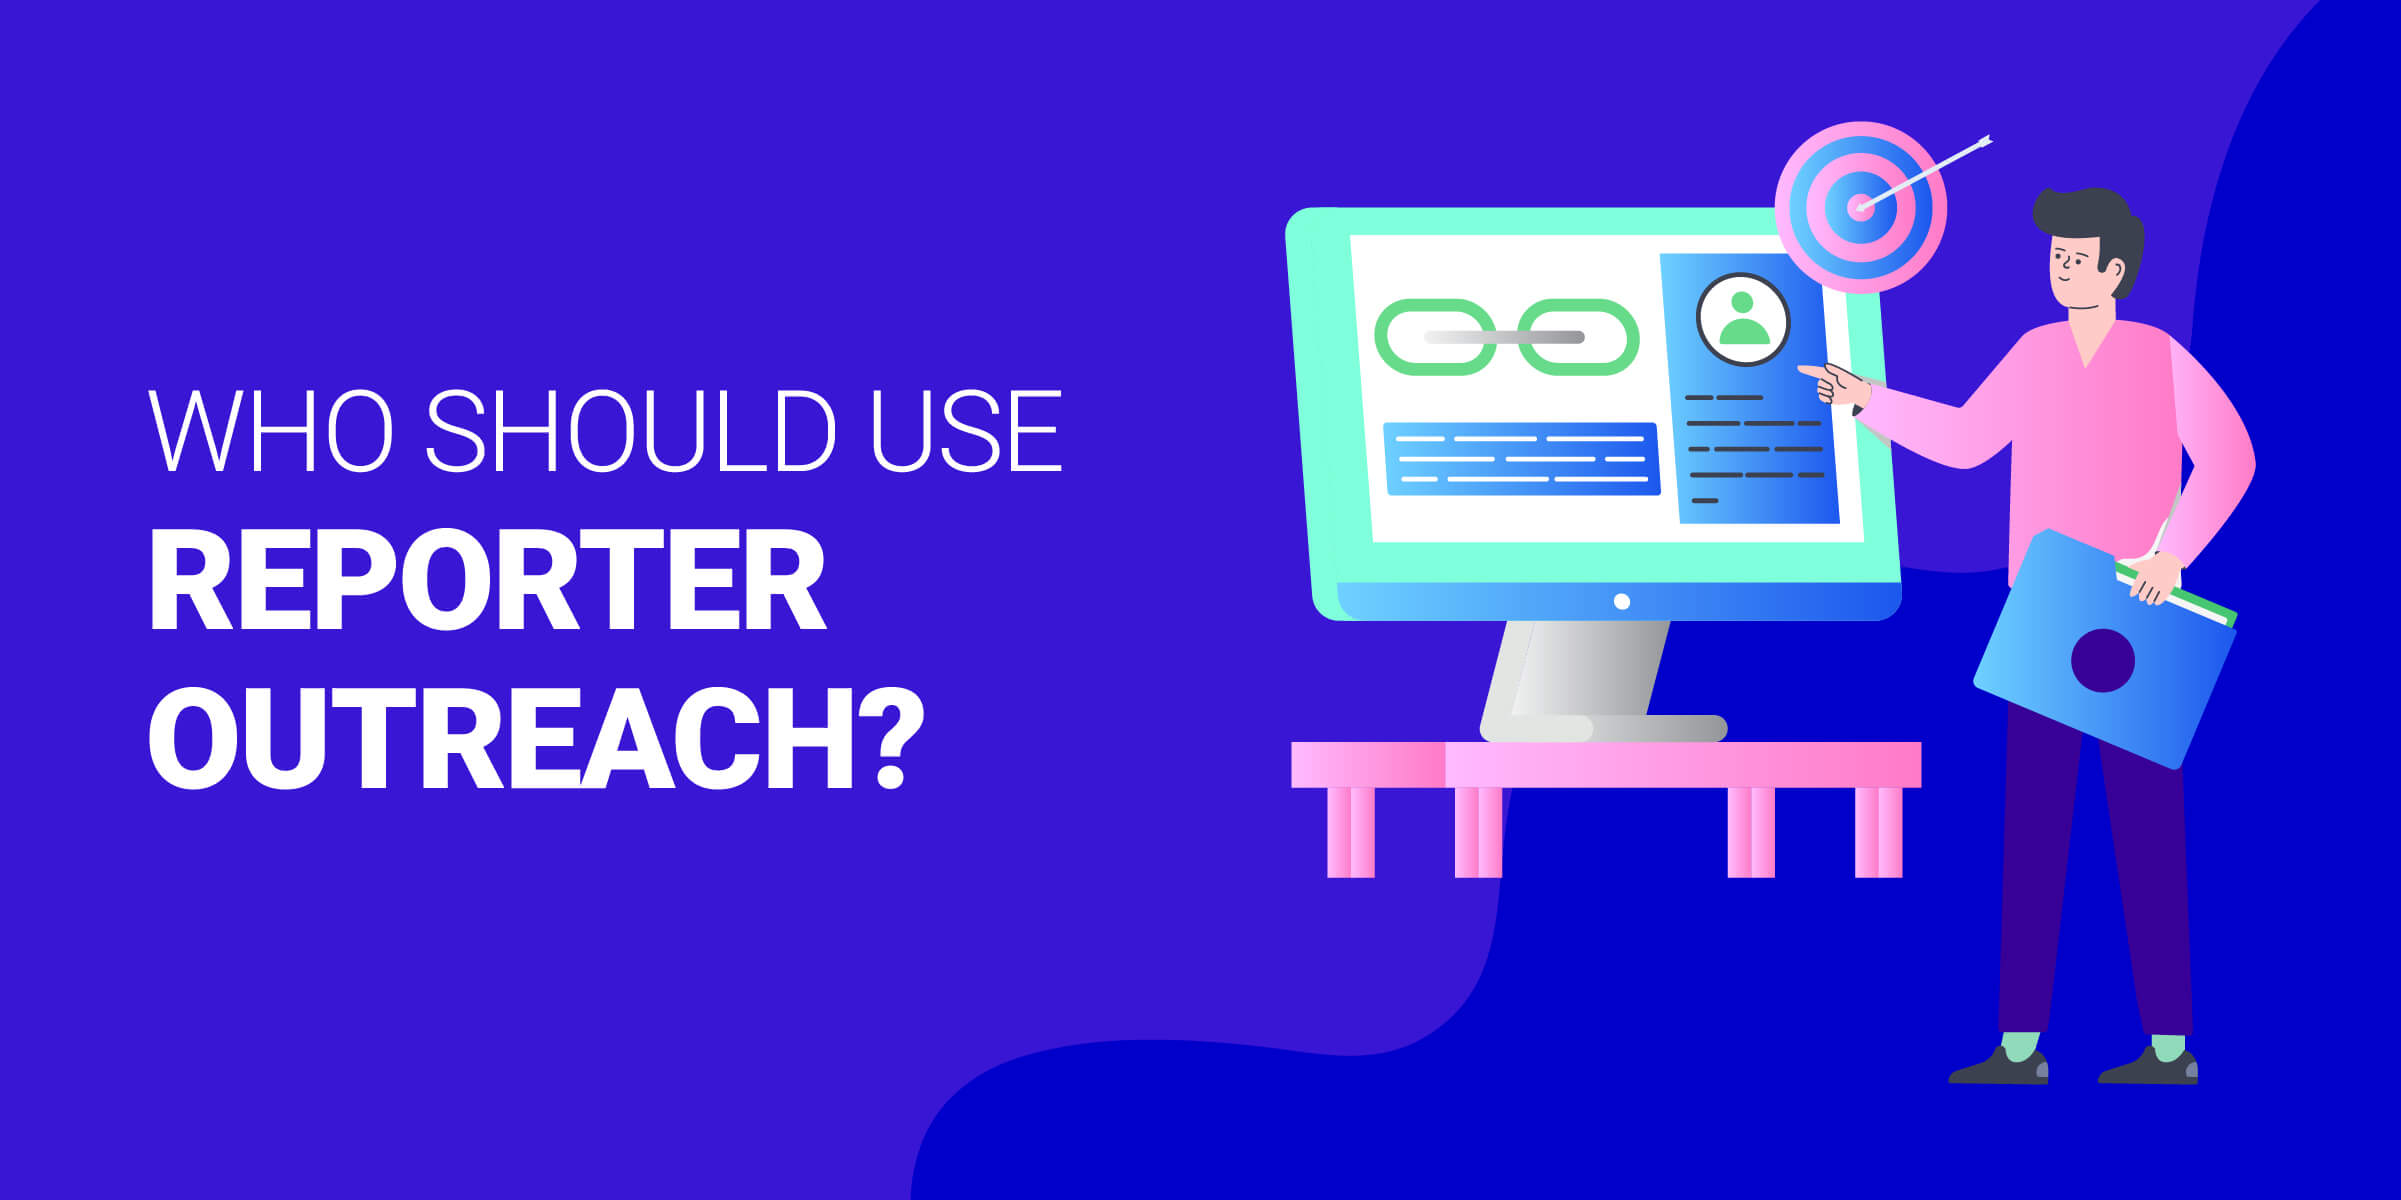 Who Should Use Reporter Outreach